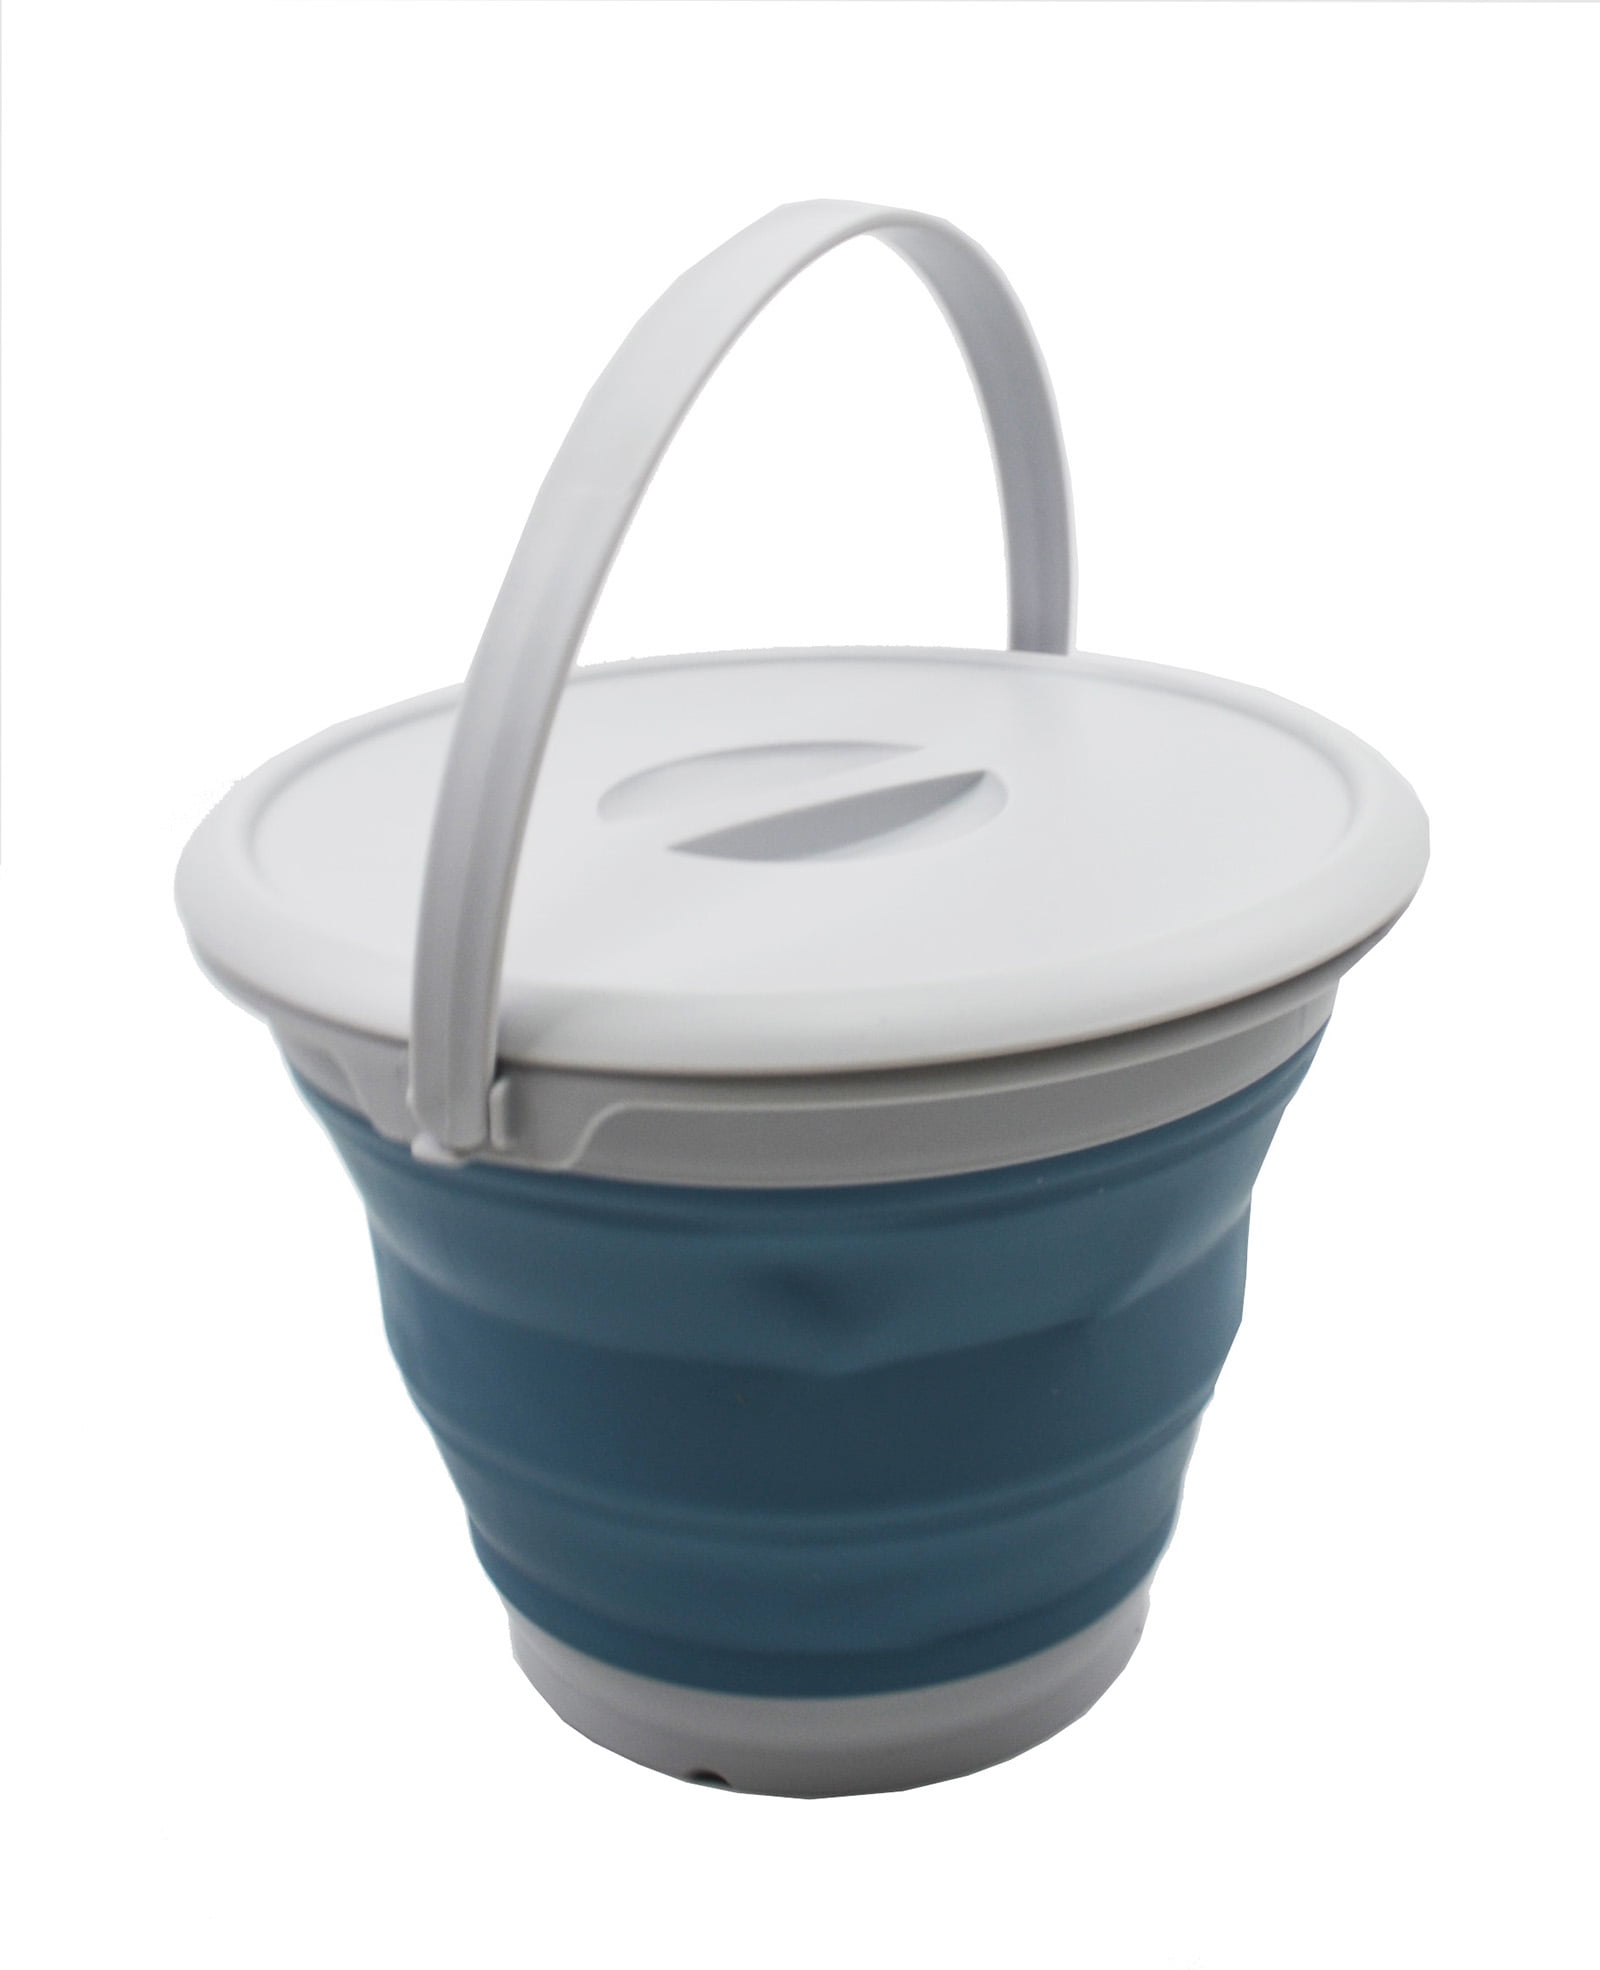 WeluvFit Collapsible Bucket with Handle, Lightweight Folding Water